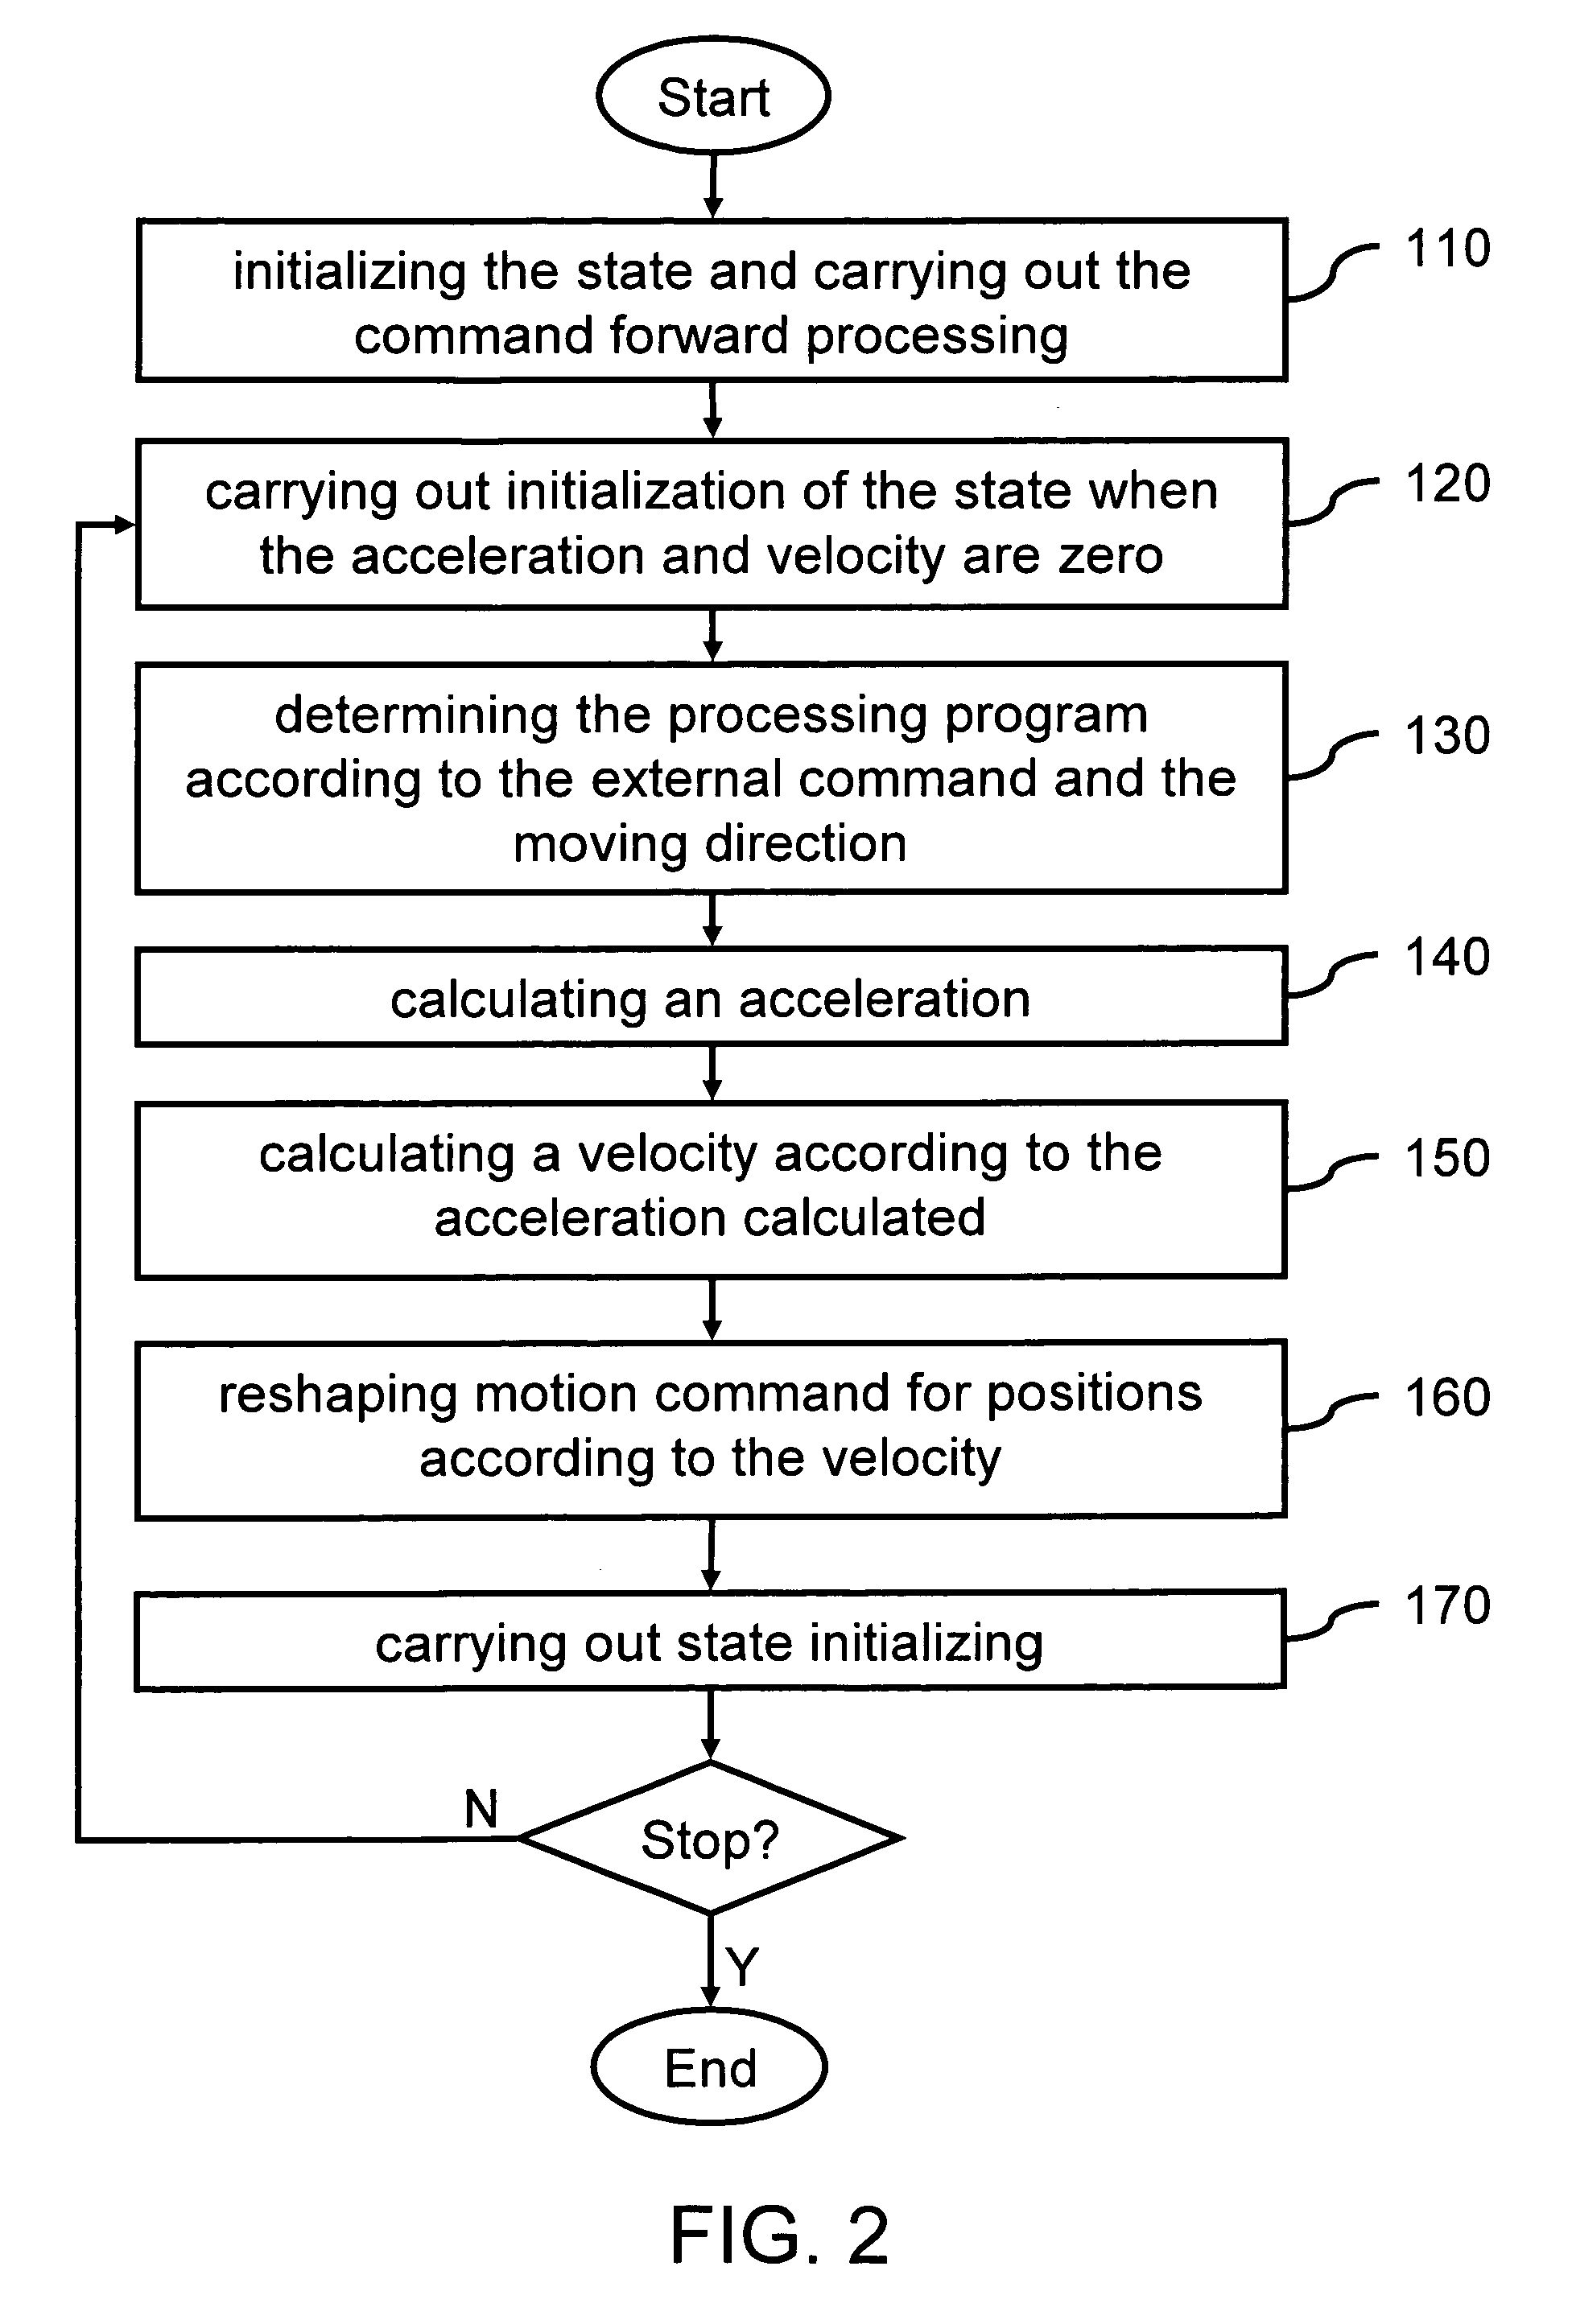 Motion command reshaping method with analog input for position s curve